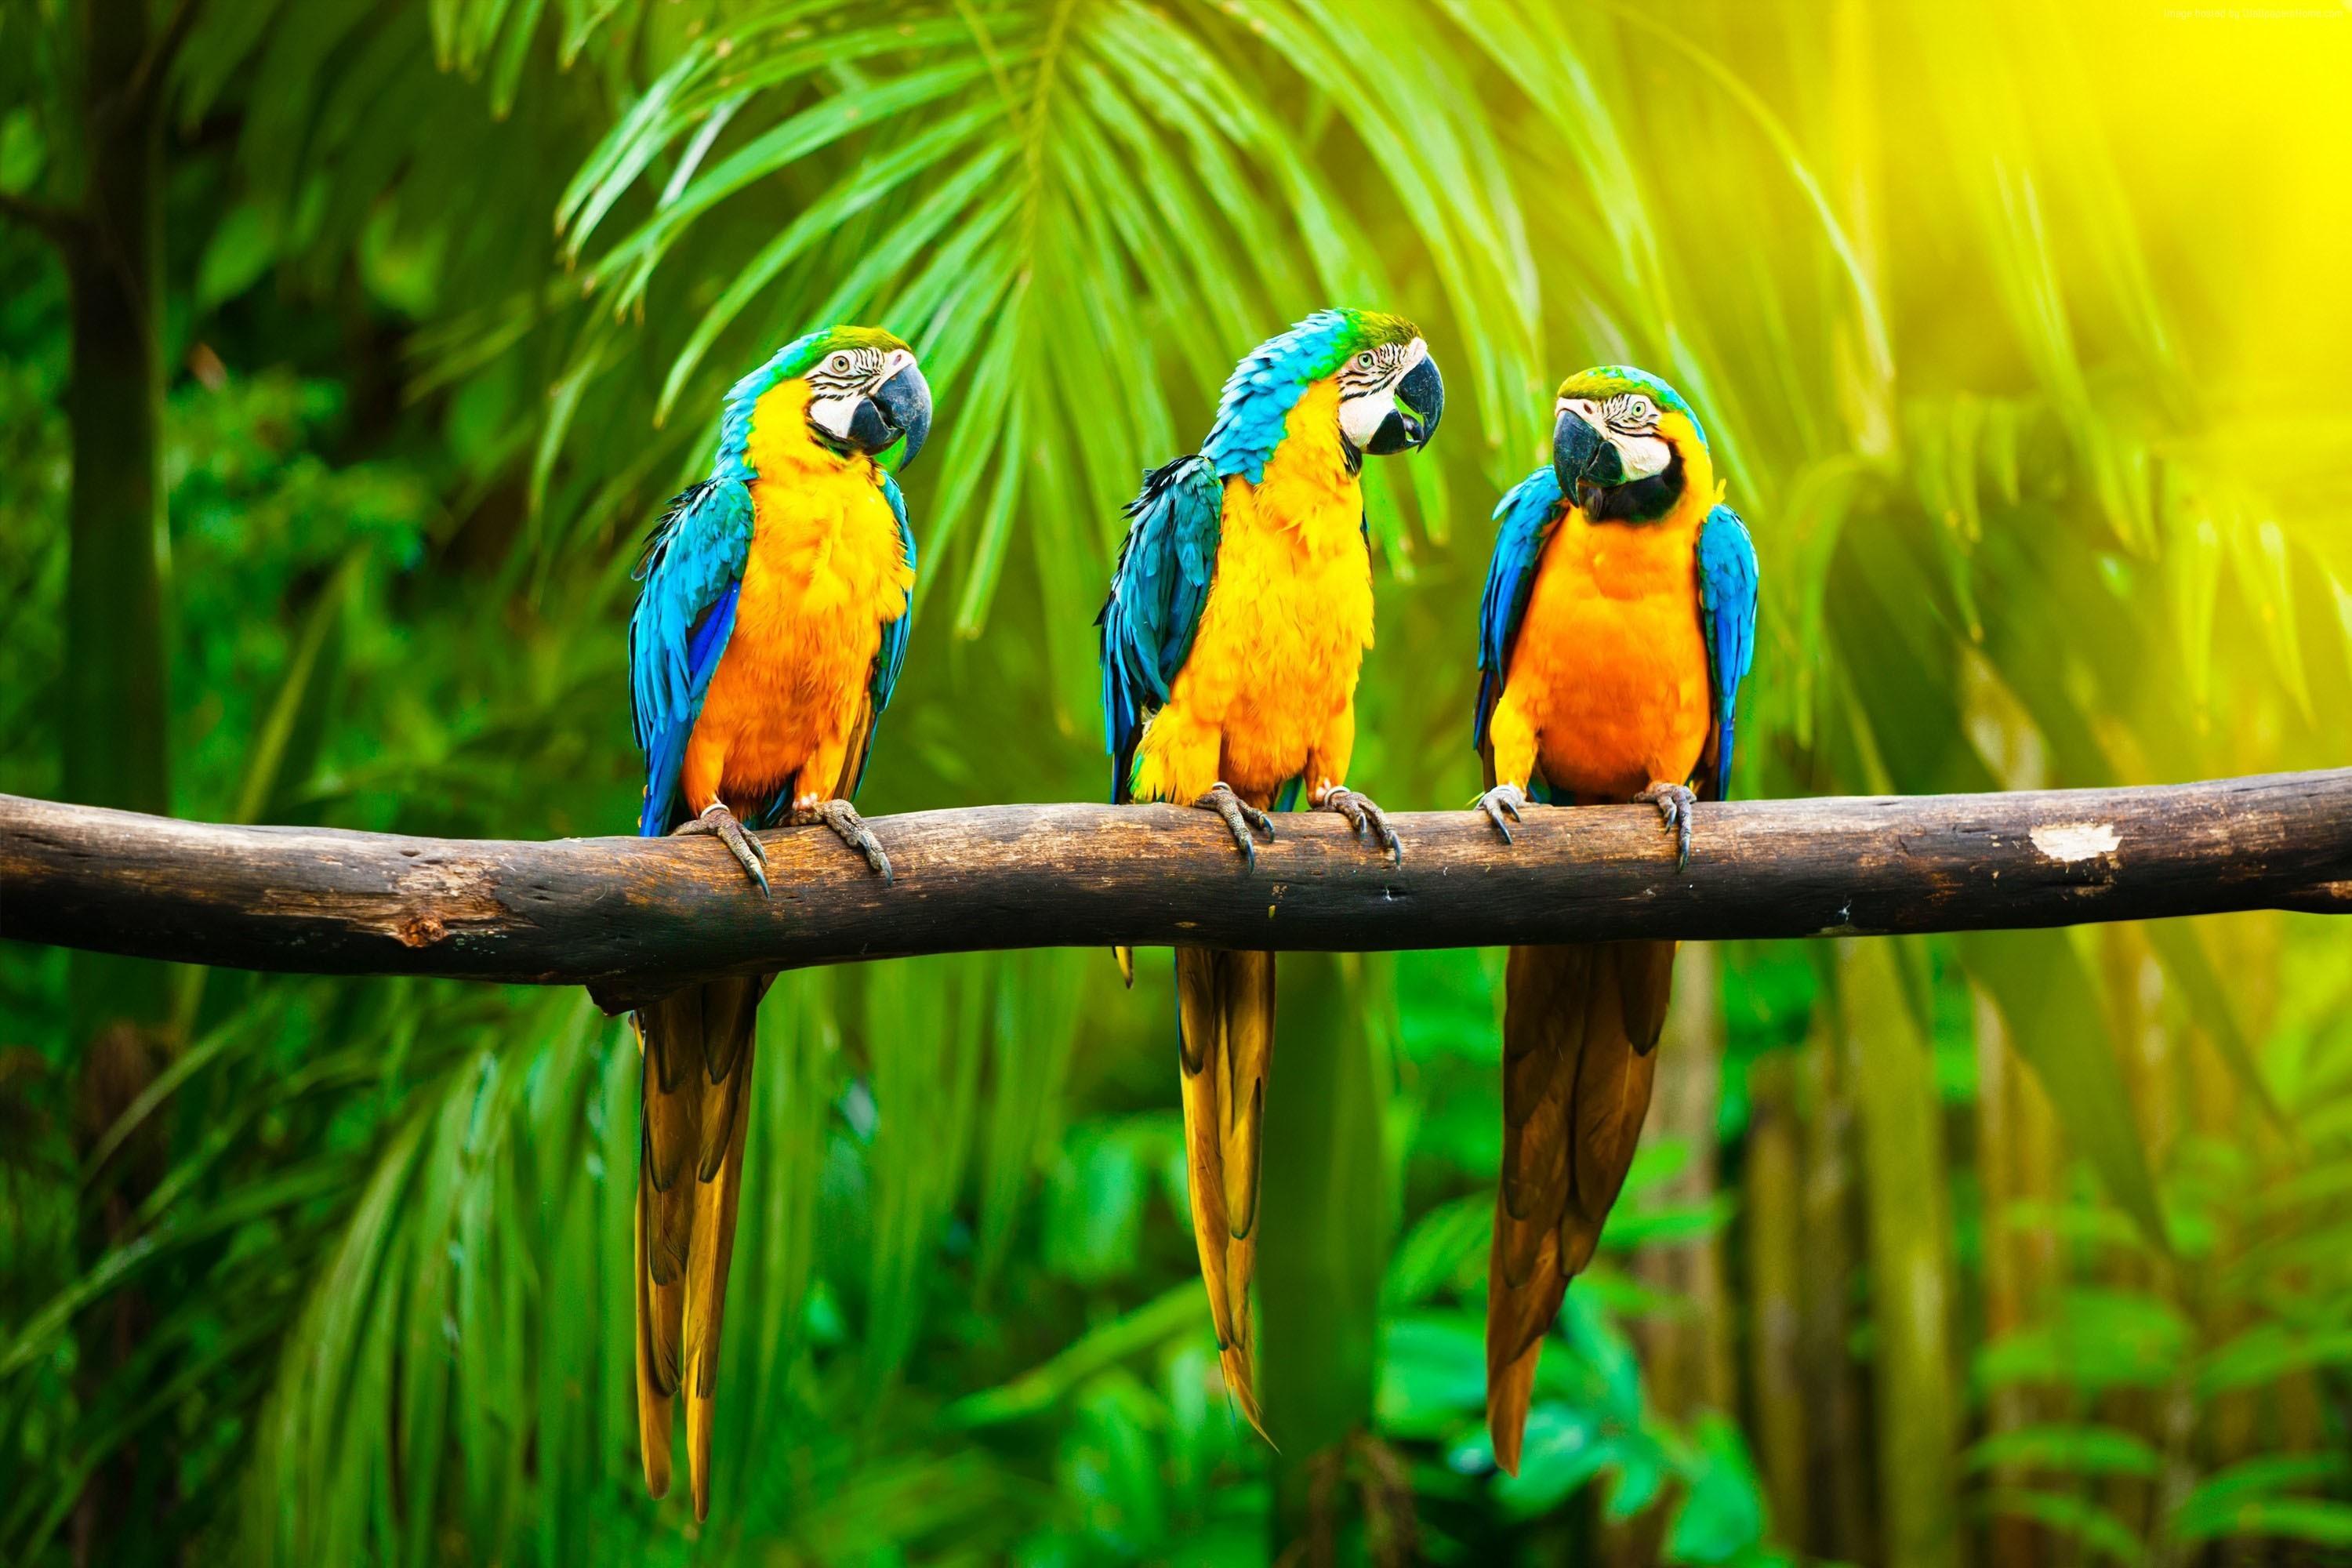 HD wallpaper: Pair Of Beautiful Colorful Parrots Scarlet Macaws Wallpapers  Hd For Mobile Phones Tablet And Computer 1920×1200 | Wallpaper Flare